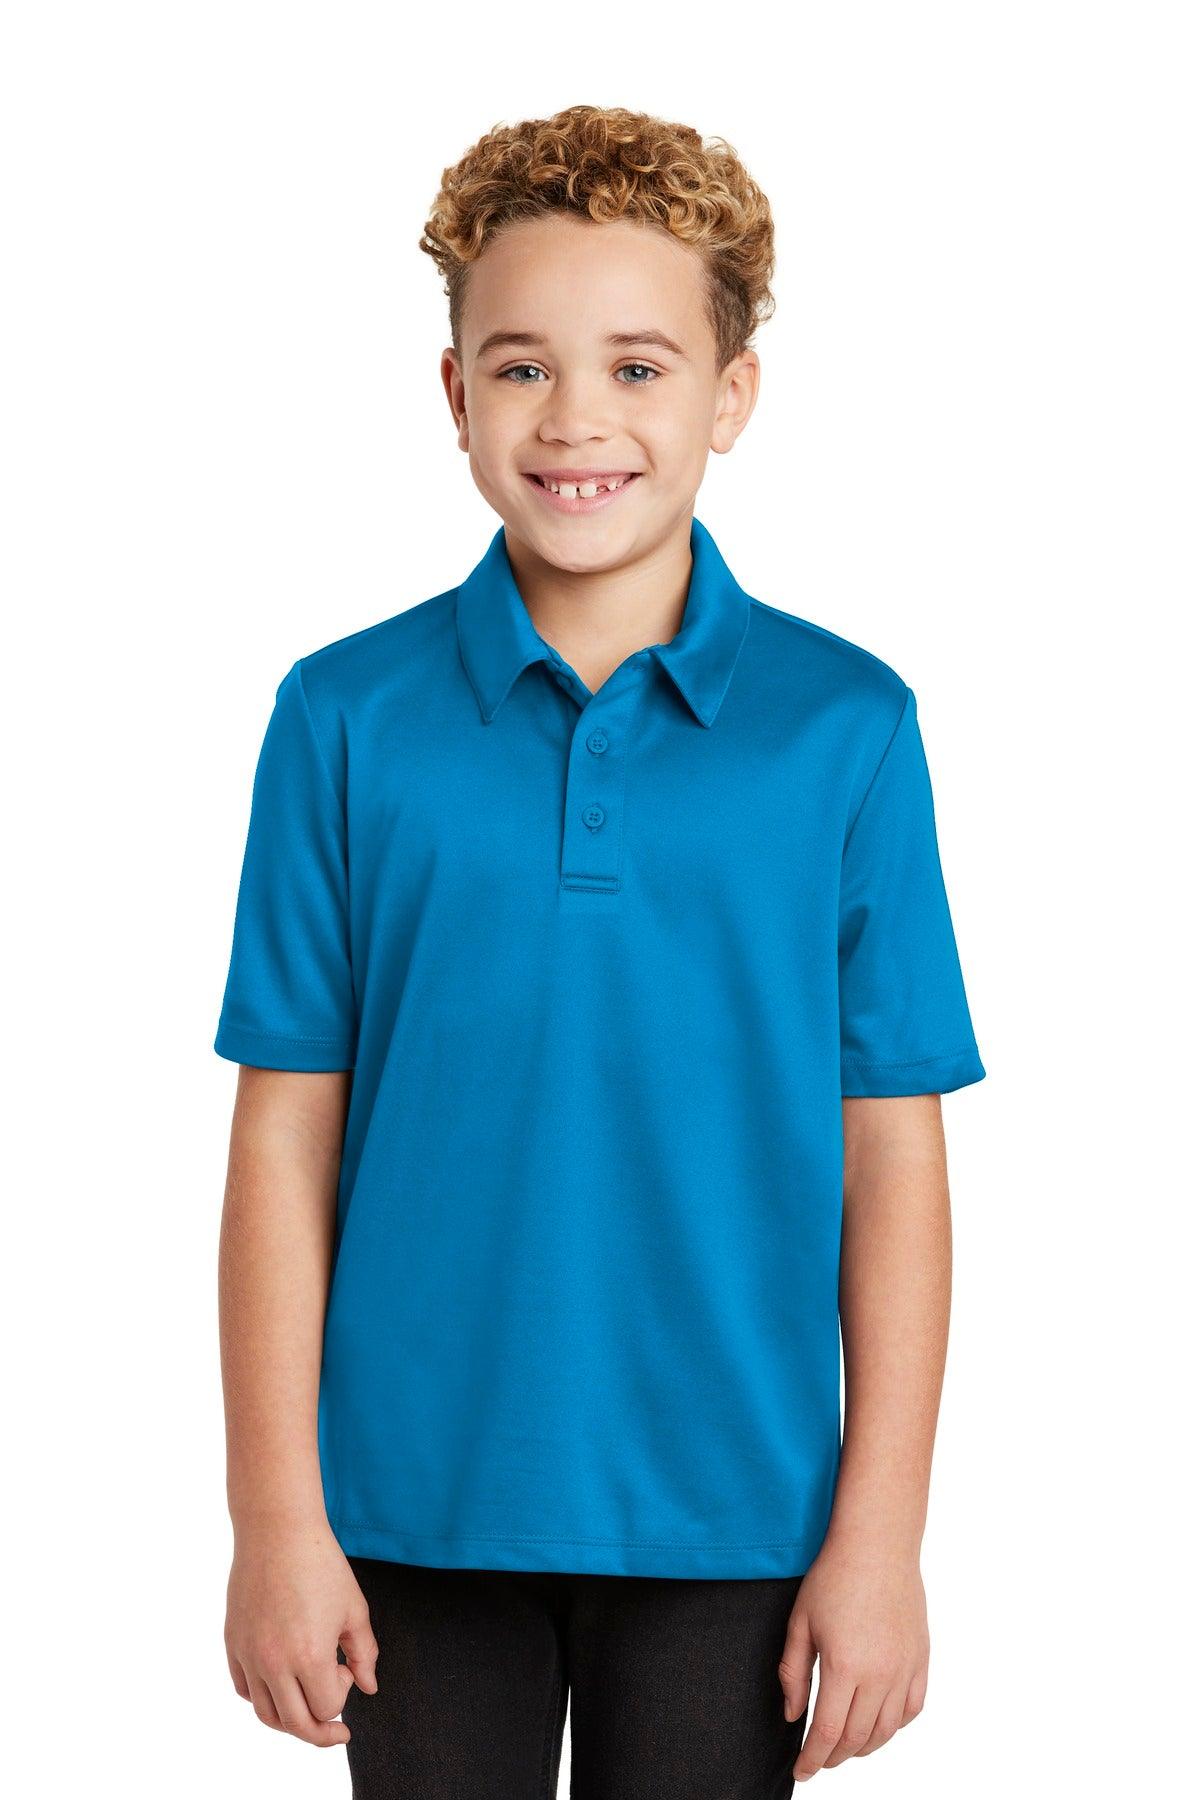 Port Authority Youth Silk Touch Performance Polo. Y540 - Dresses Max